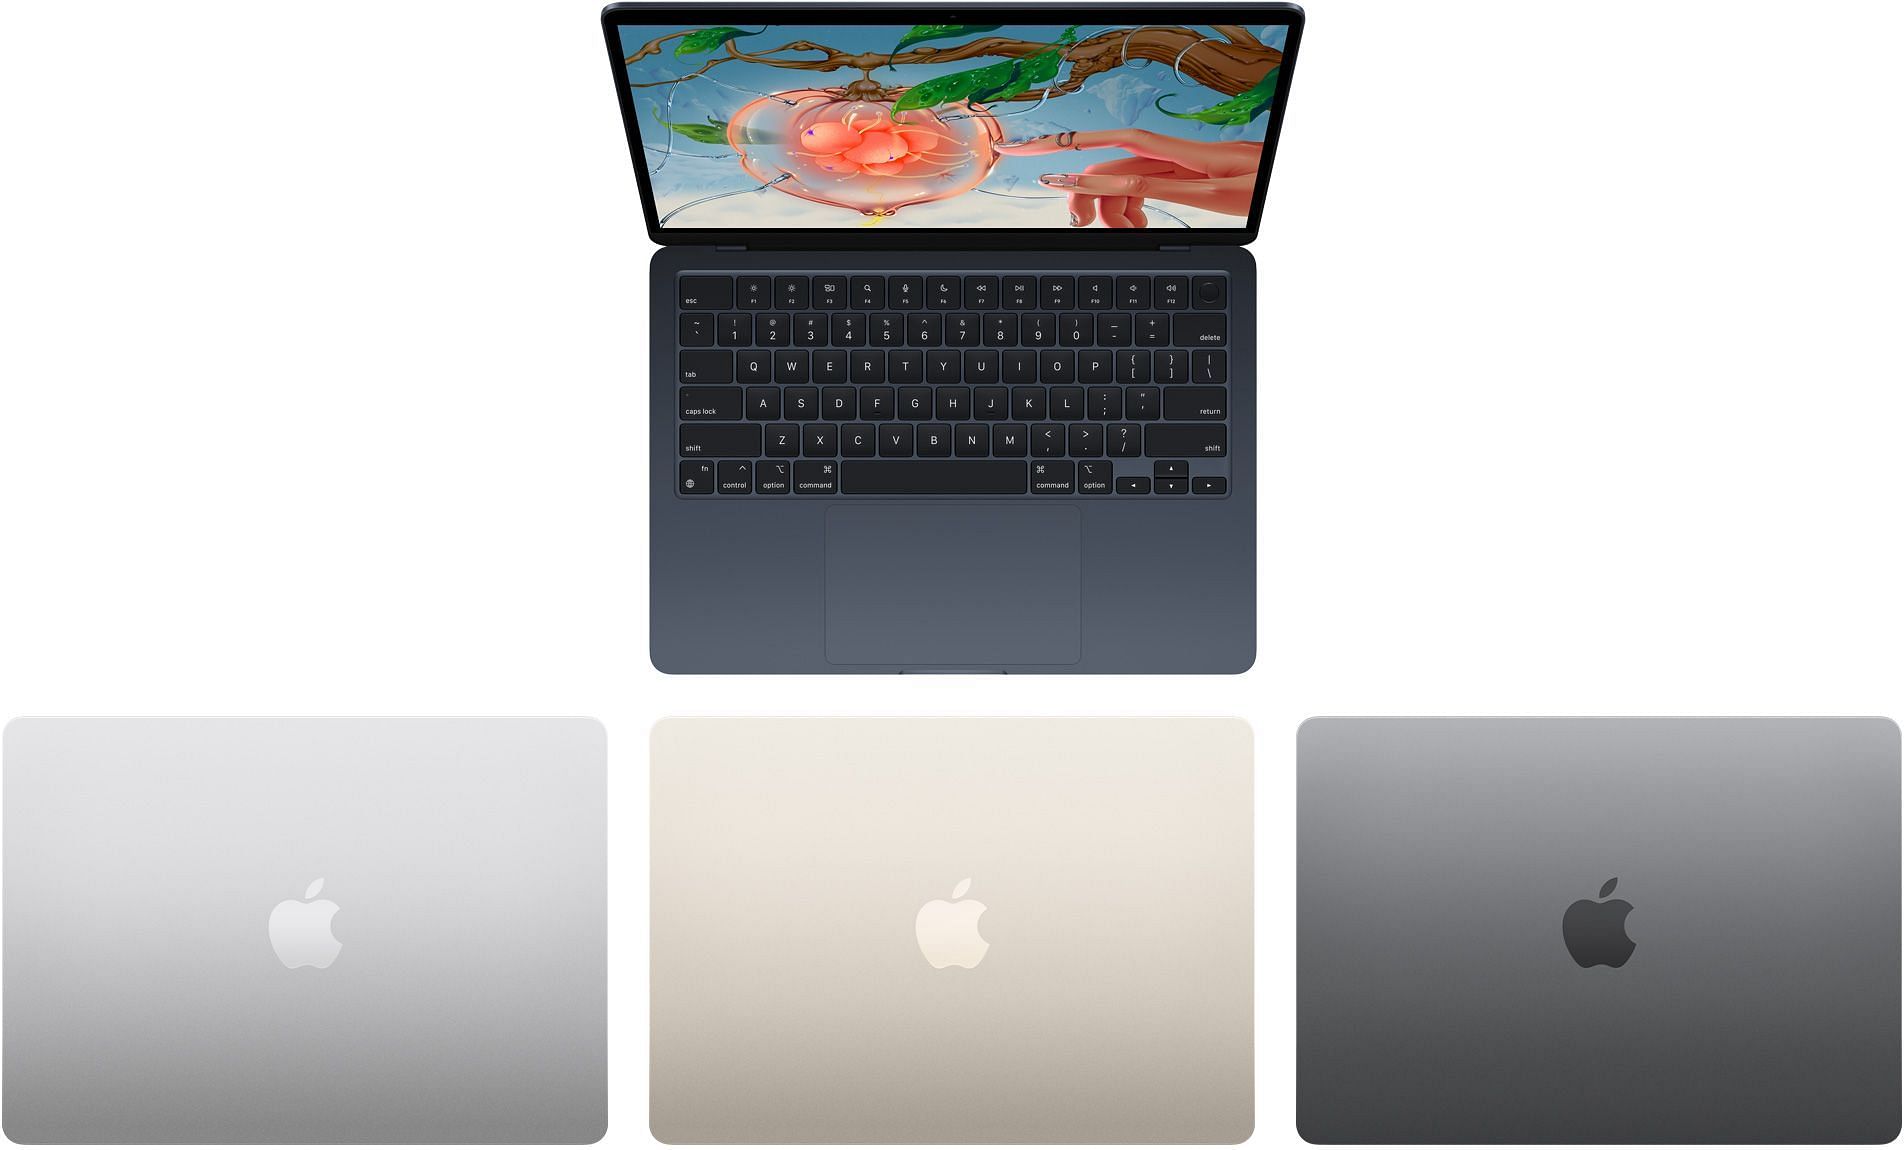 New Macbook Pro and Air announced with M2 chipset Price, release date